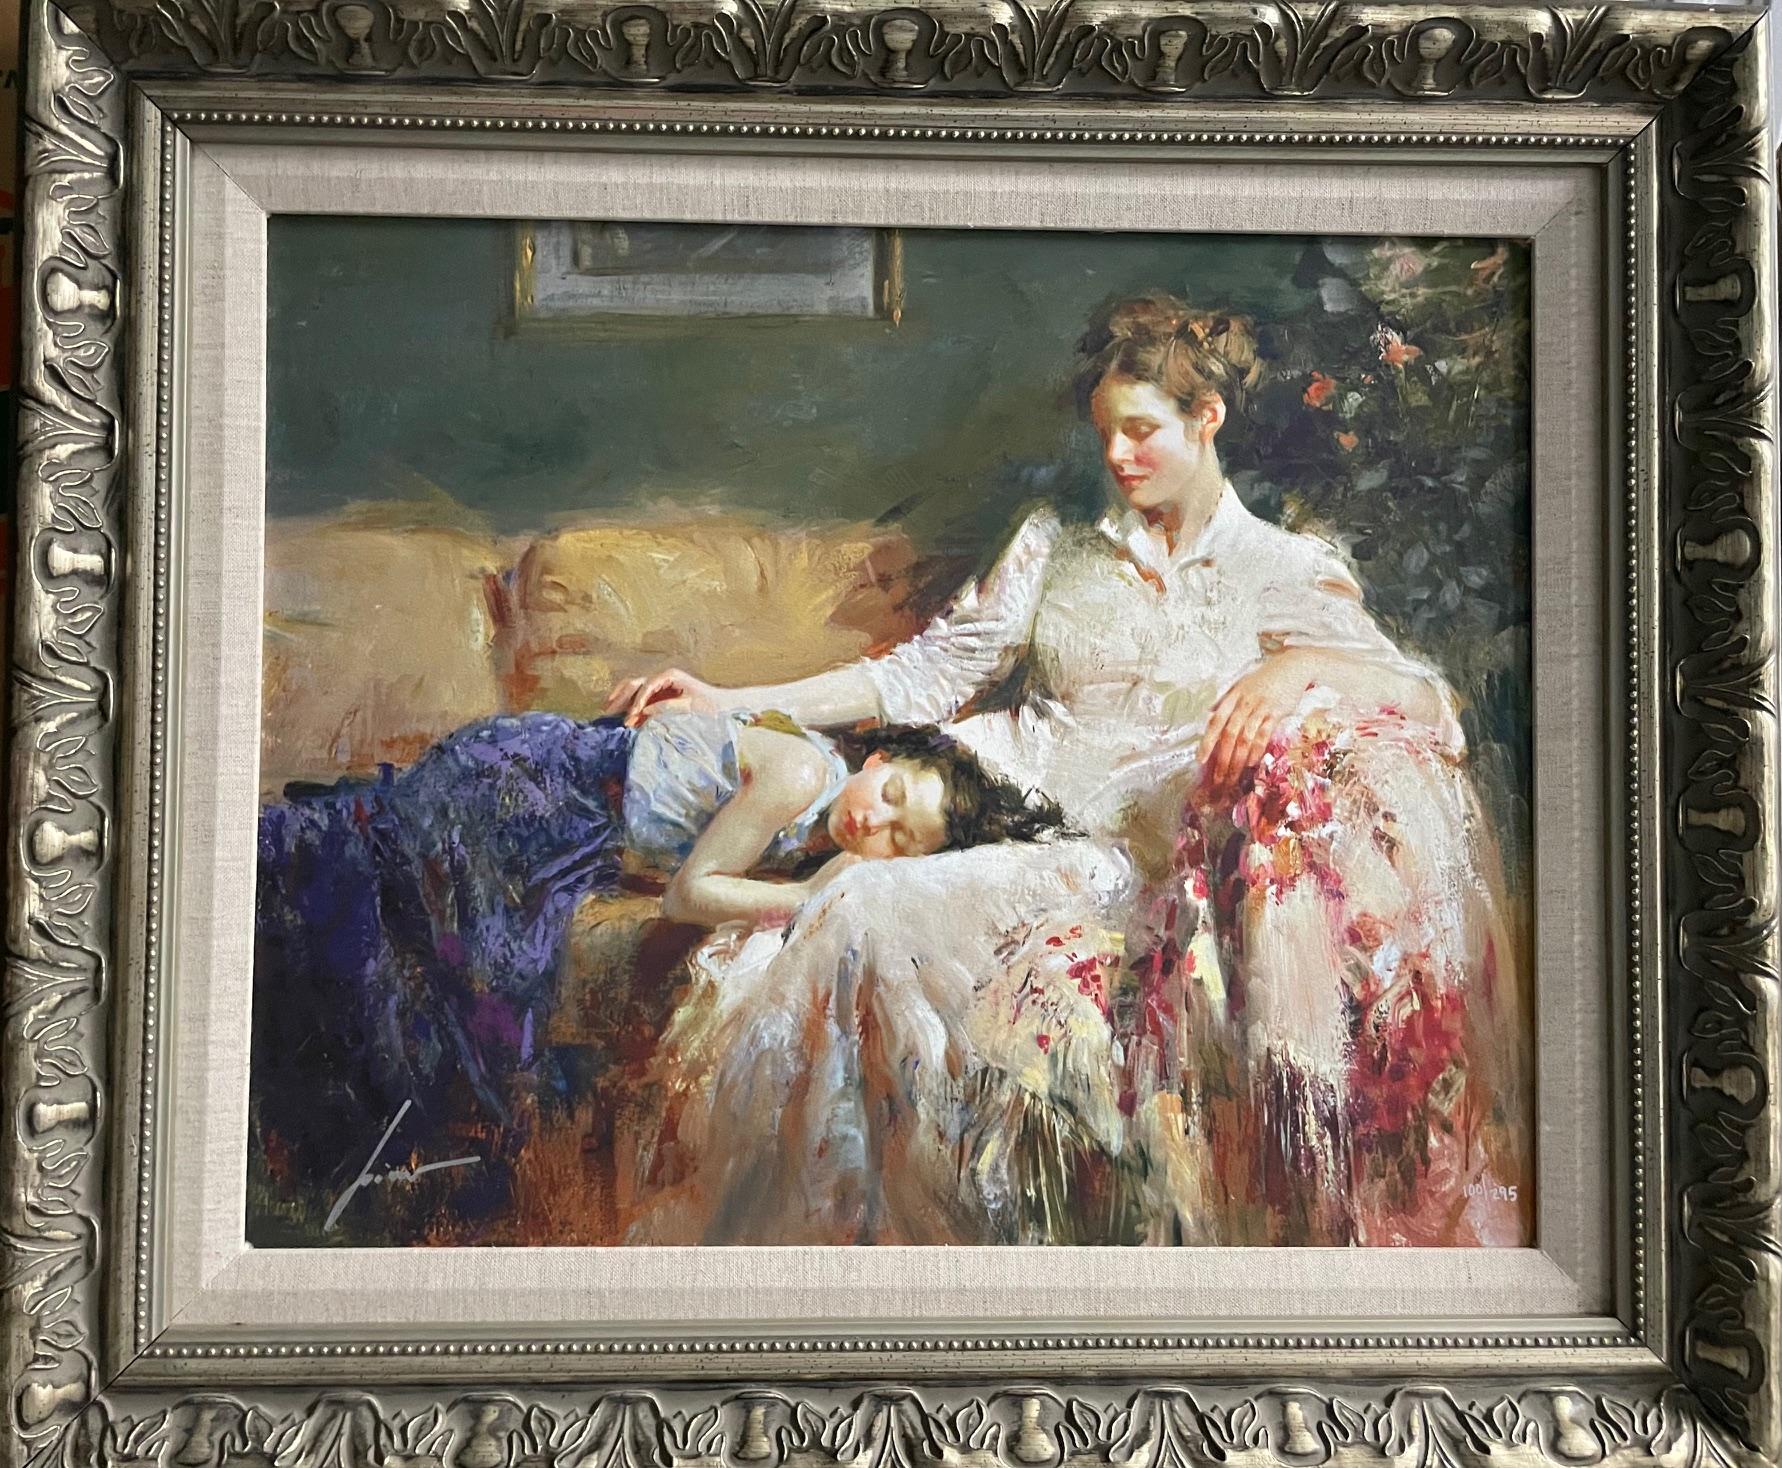 Sentimental is the adjective to describe this beautiful portrait of a mother with her innocent child.
This is a beautifully framed limited edition lithograph  (100/295) on paper signed by the artist Pino Daeni. 
It is in excellent condition.